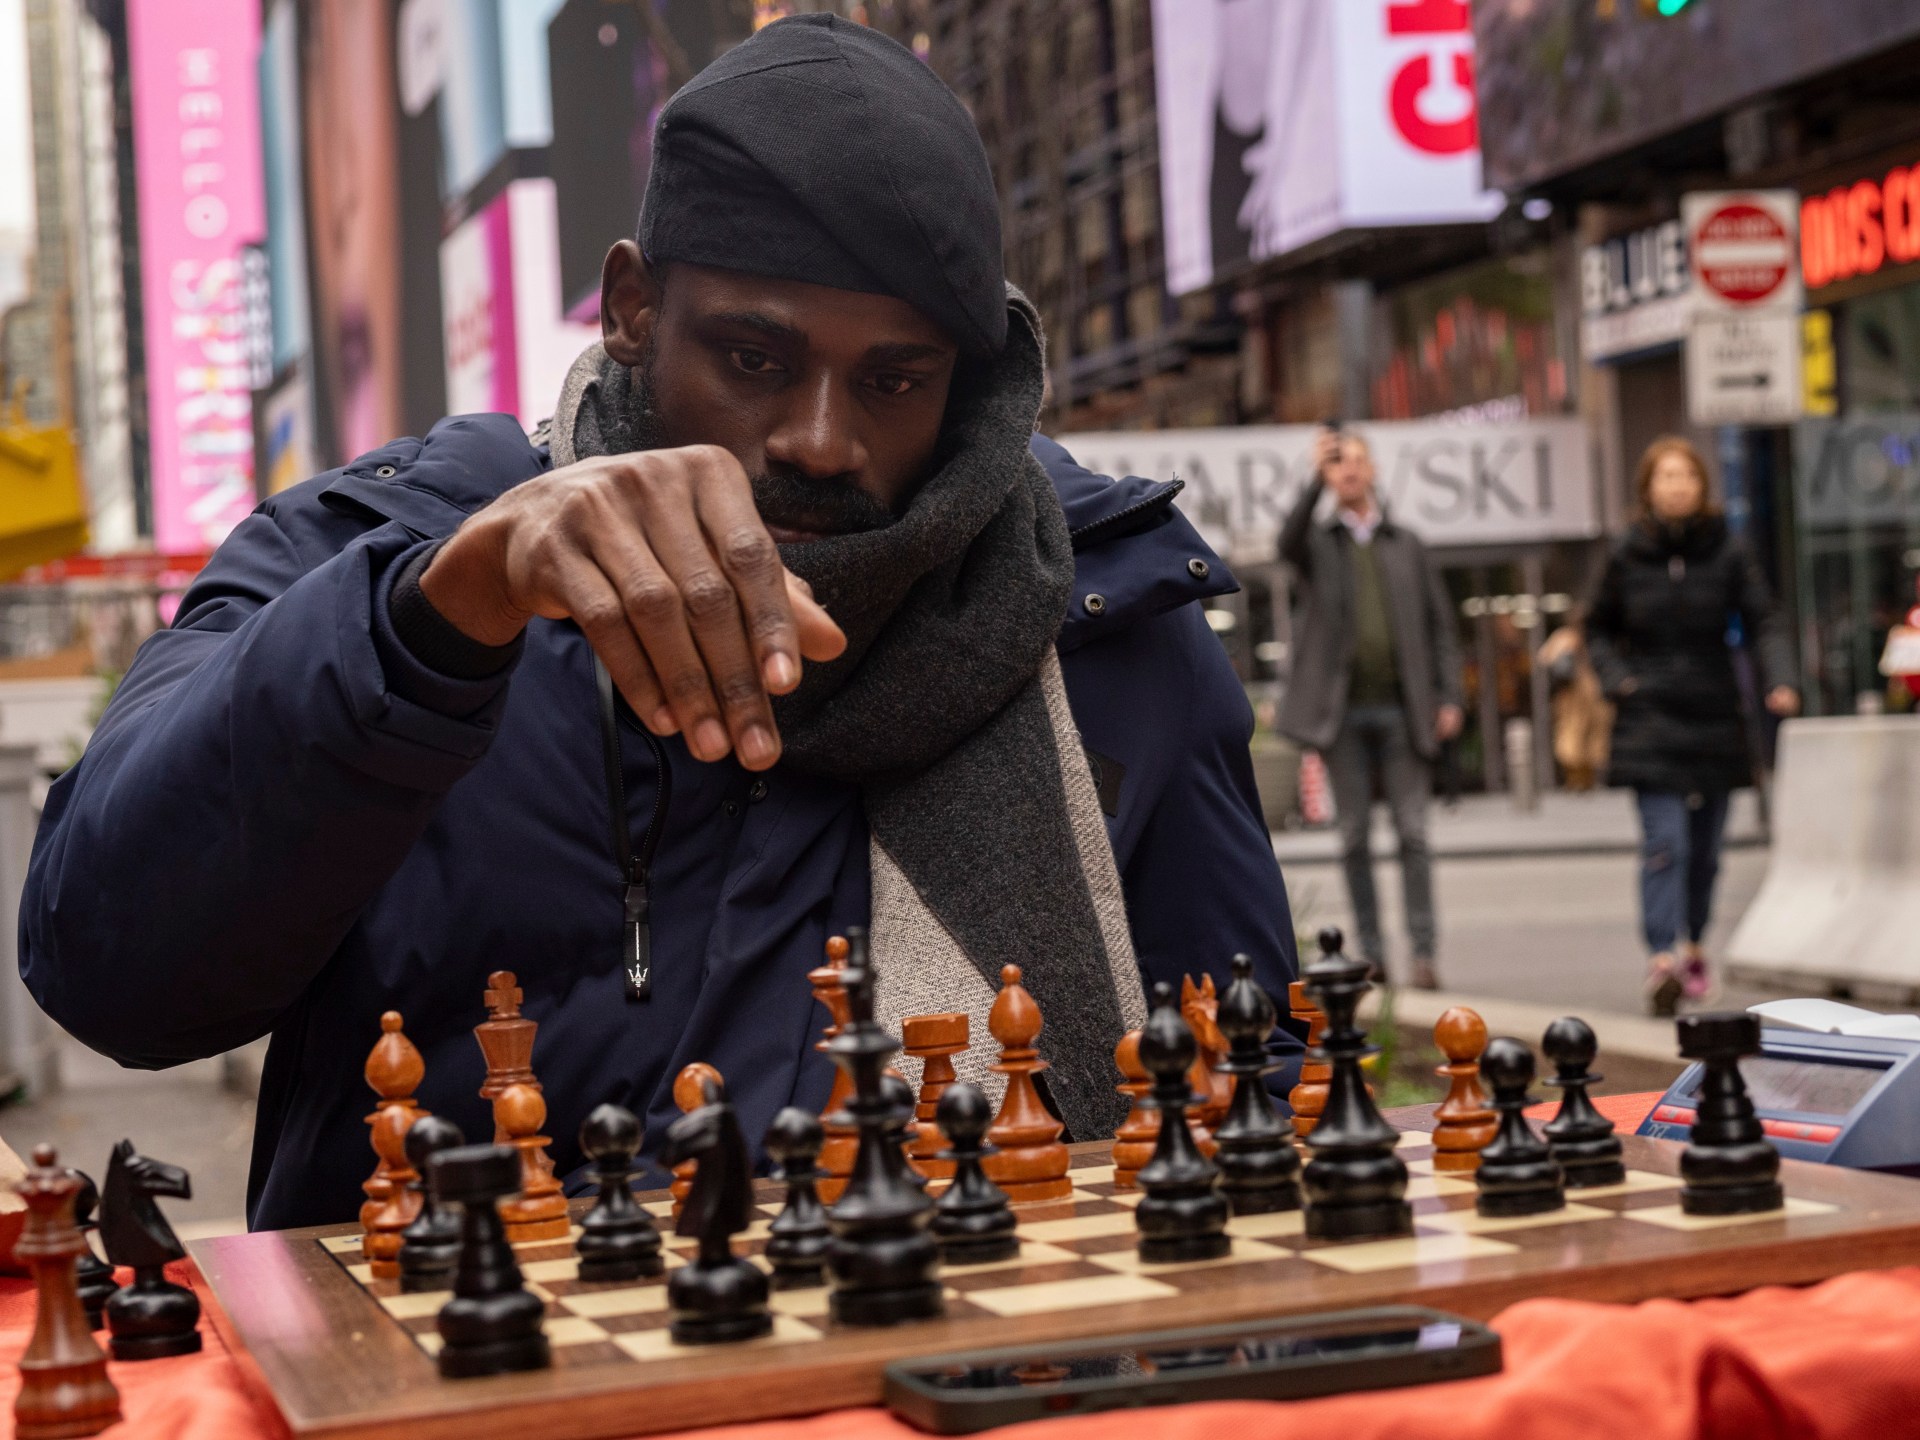 Nigeria’s Tunde Onakoya sets global chess record with 60 hour nonstop game